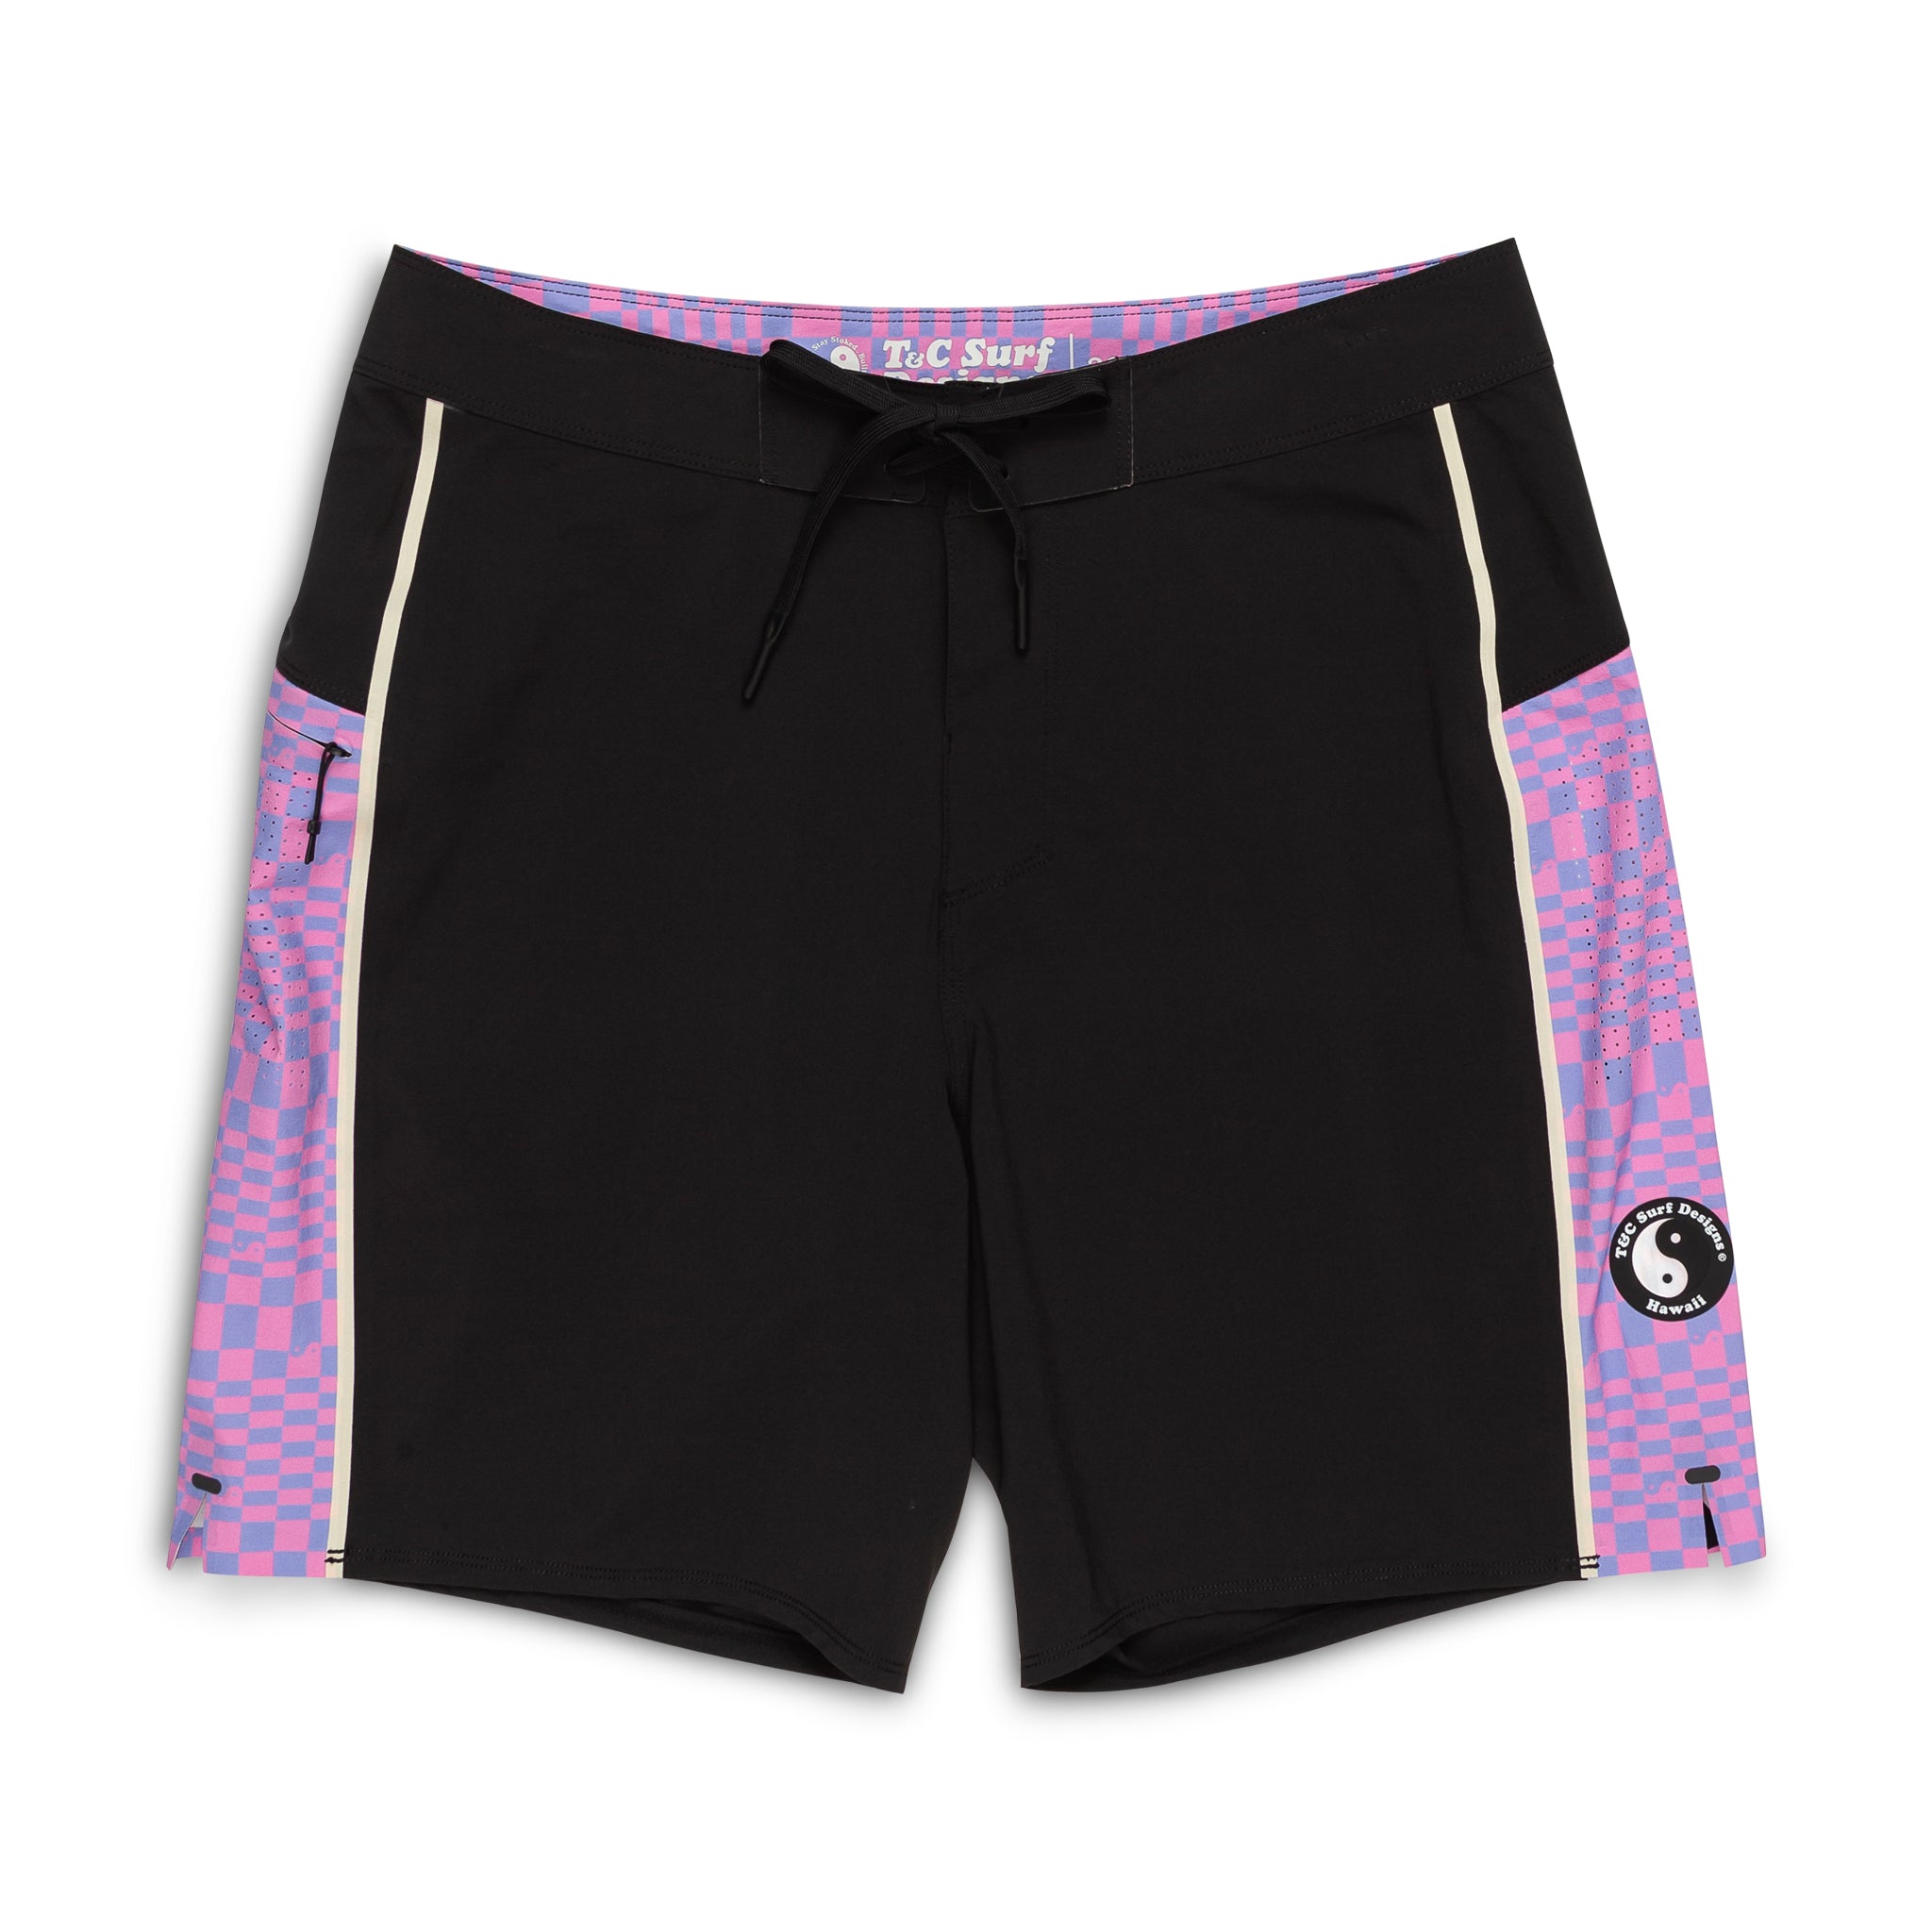 T&C Surf Designs STAY STOKED 19'' Boardshorts Black